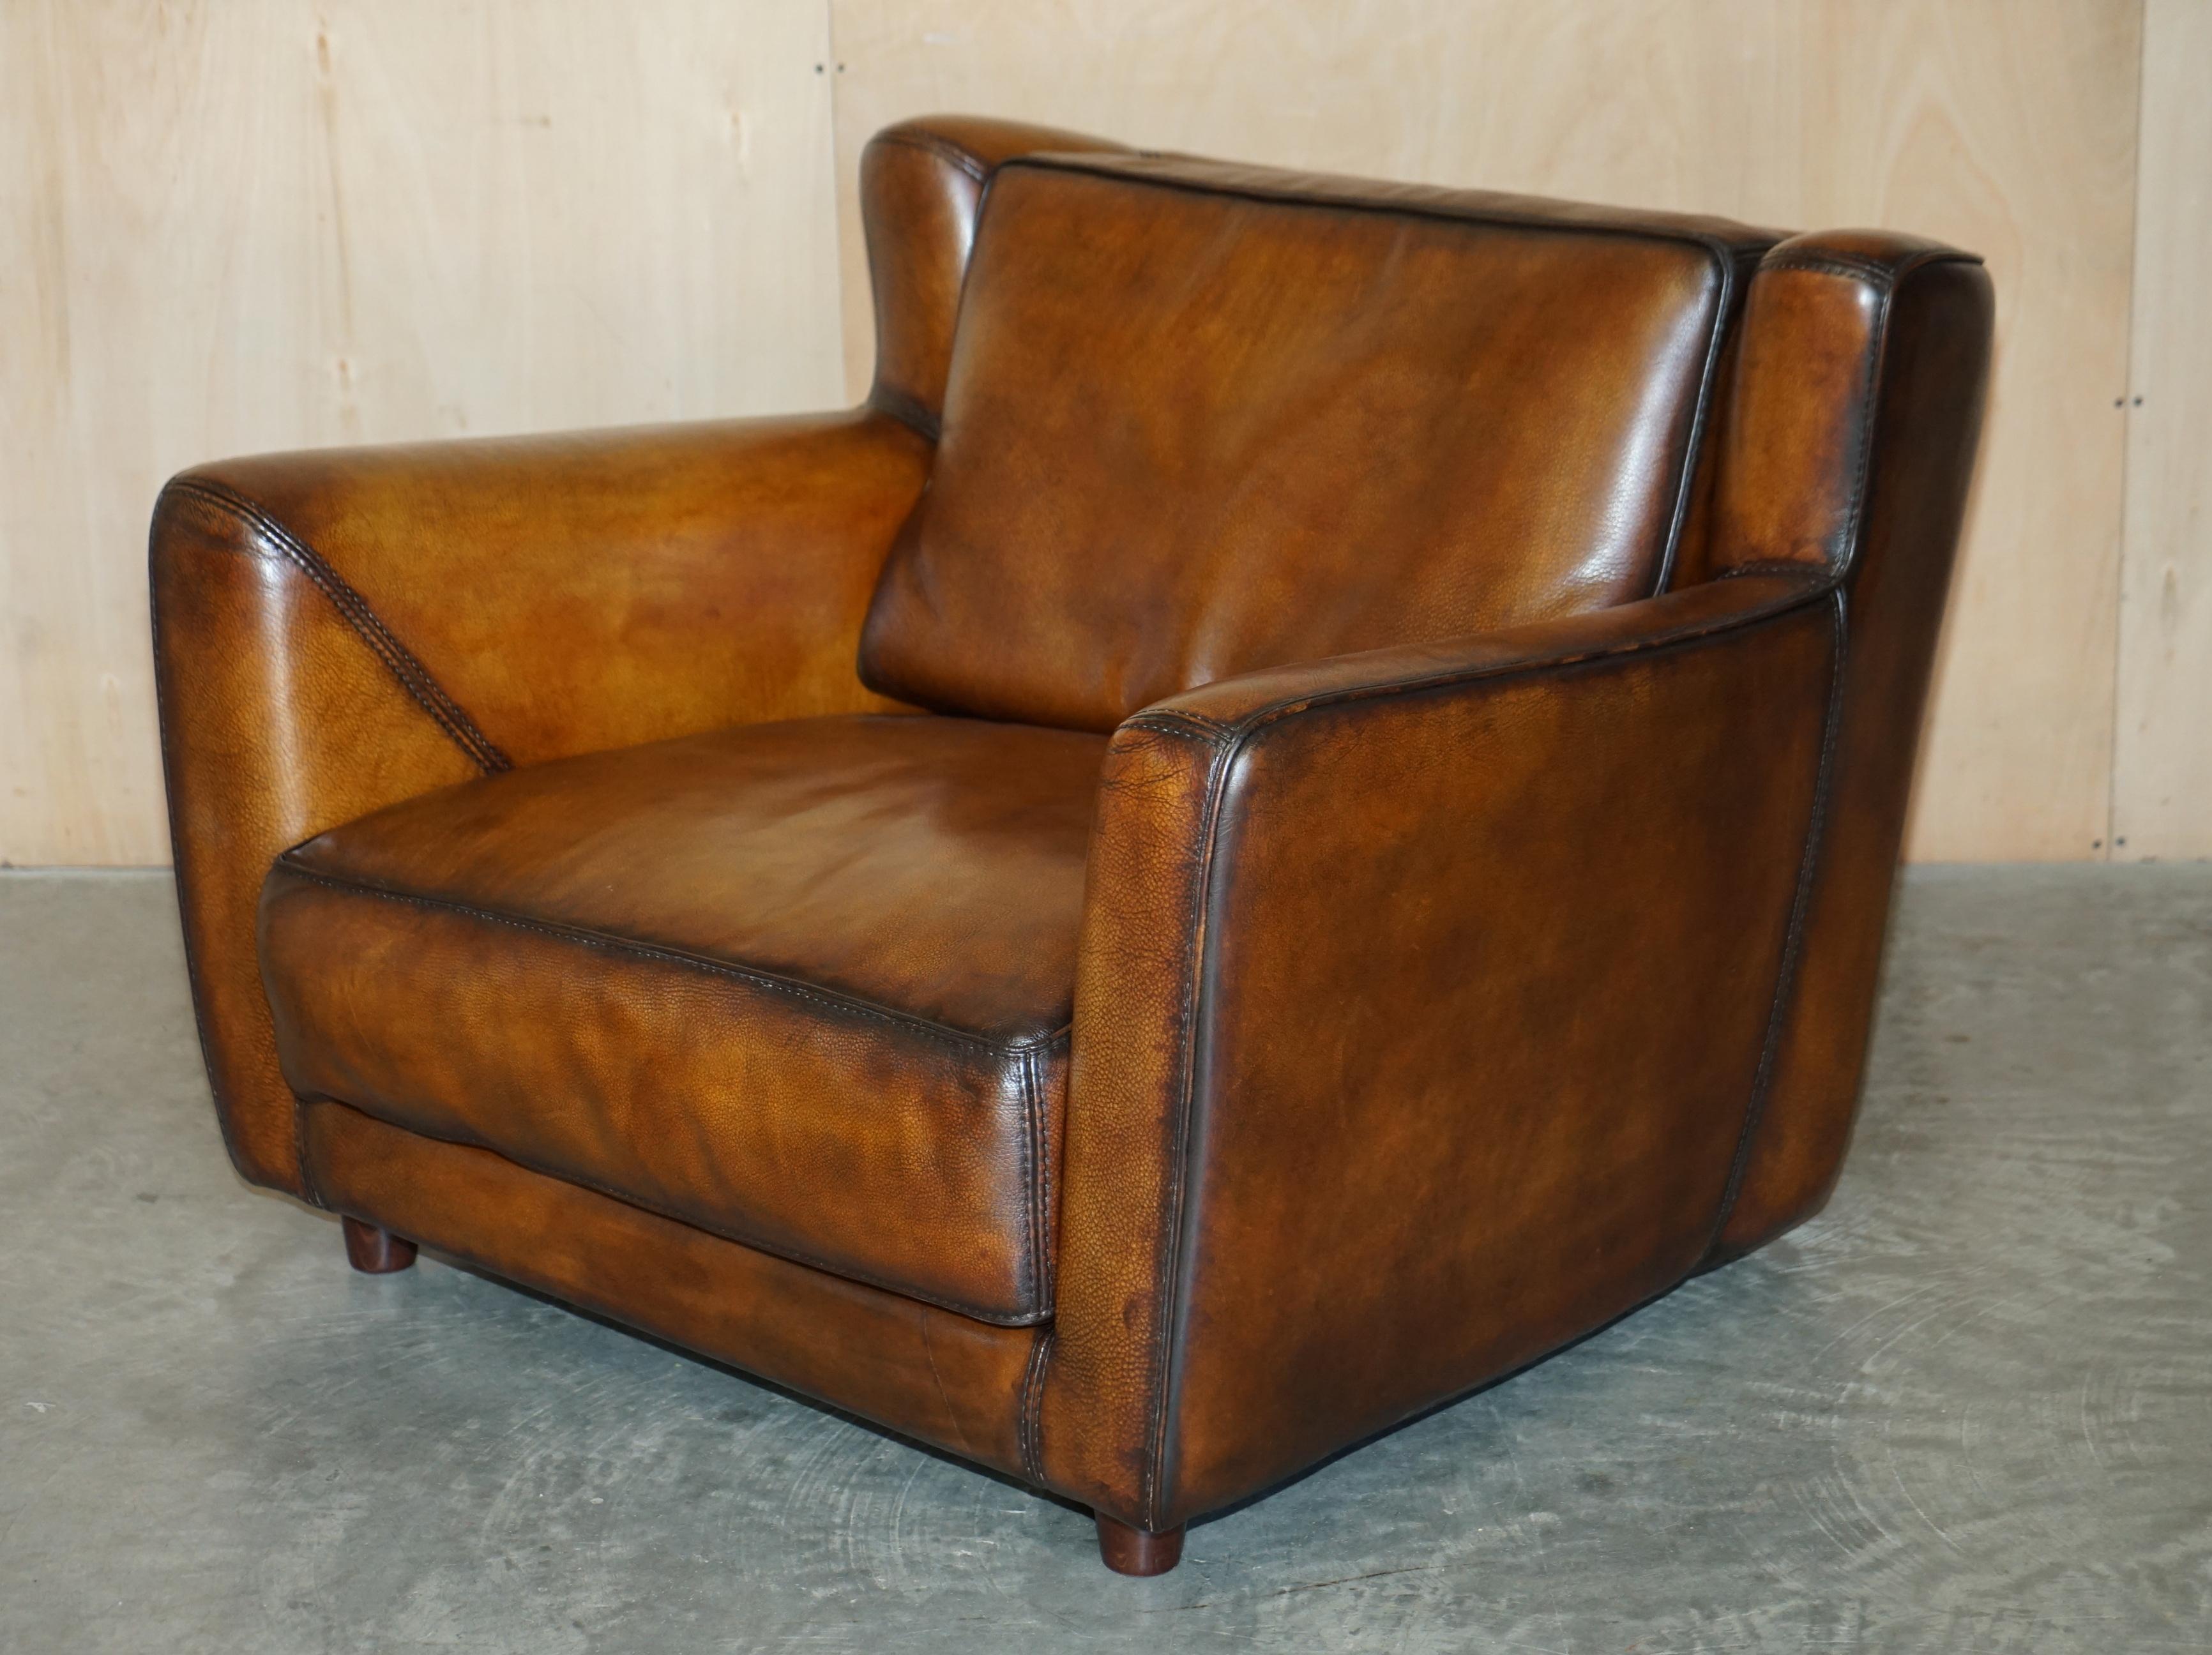 We are delighted to offer for sale this very well made pair of original Baxter Berger large love seat armchairs, hand dyed this one of a kind cigar brown colour

This is one of the most impressive pairs of armchairs I have seen in a long time,